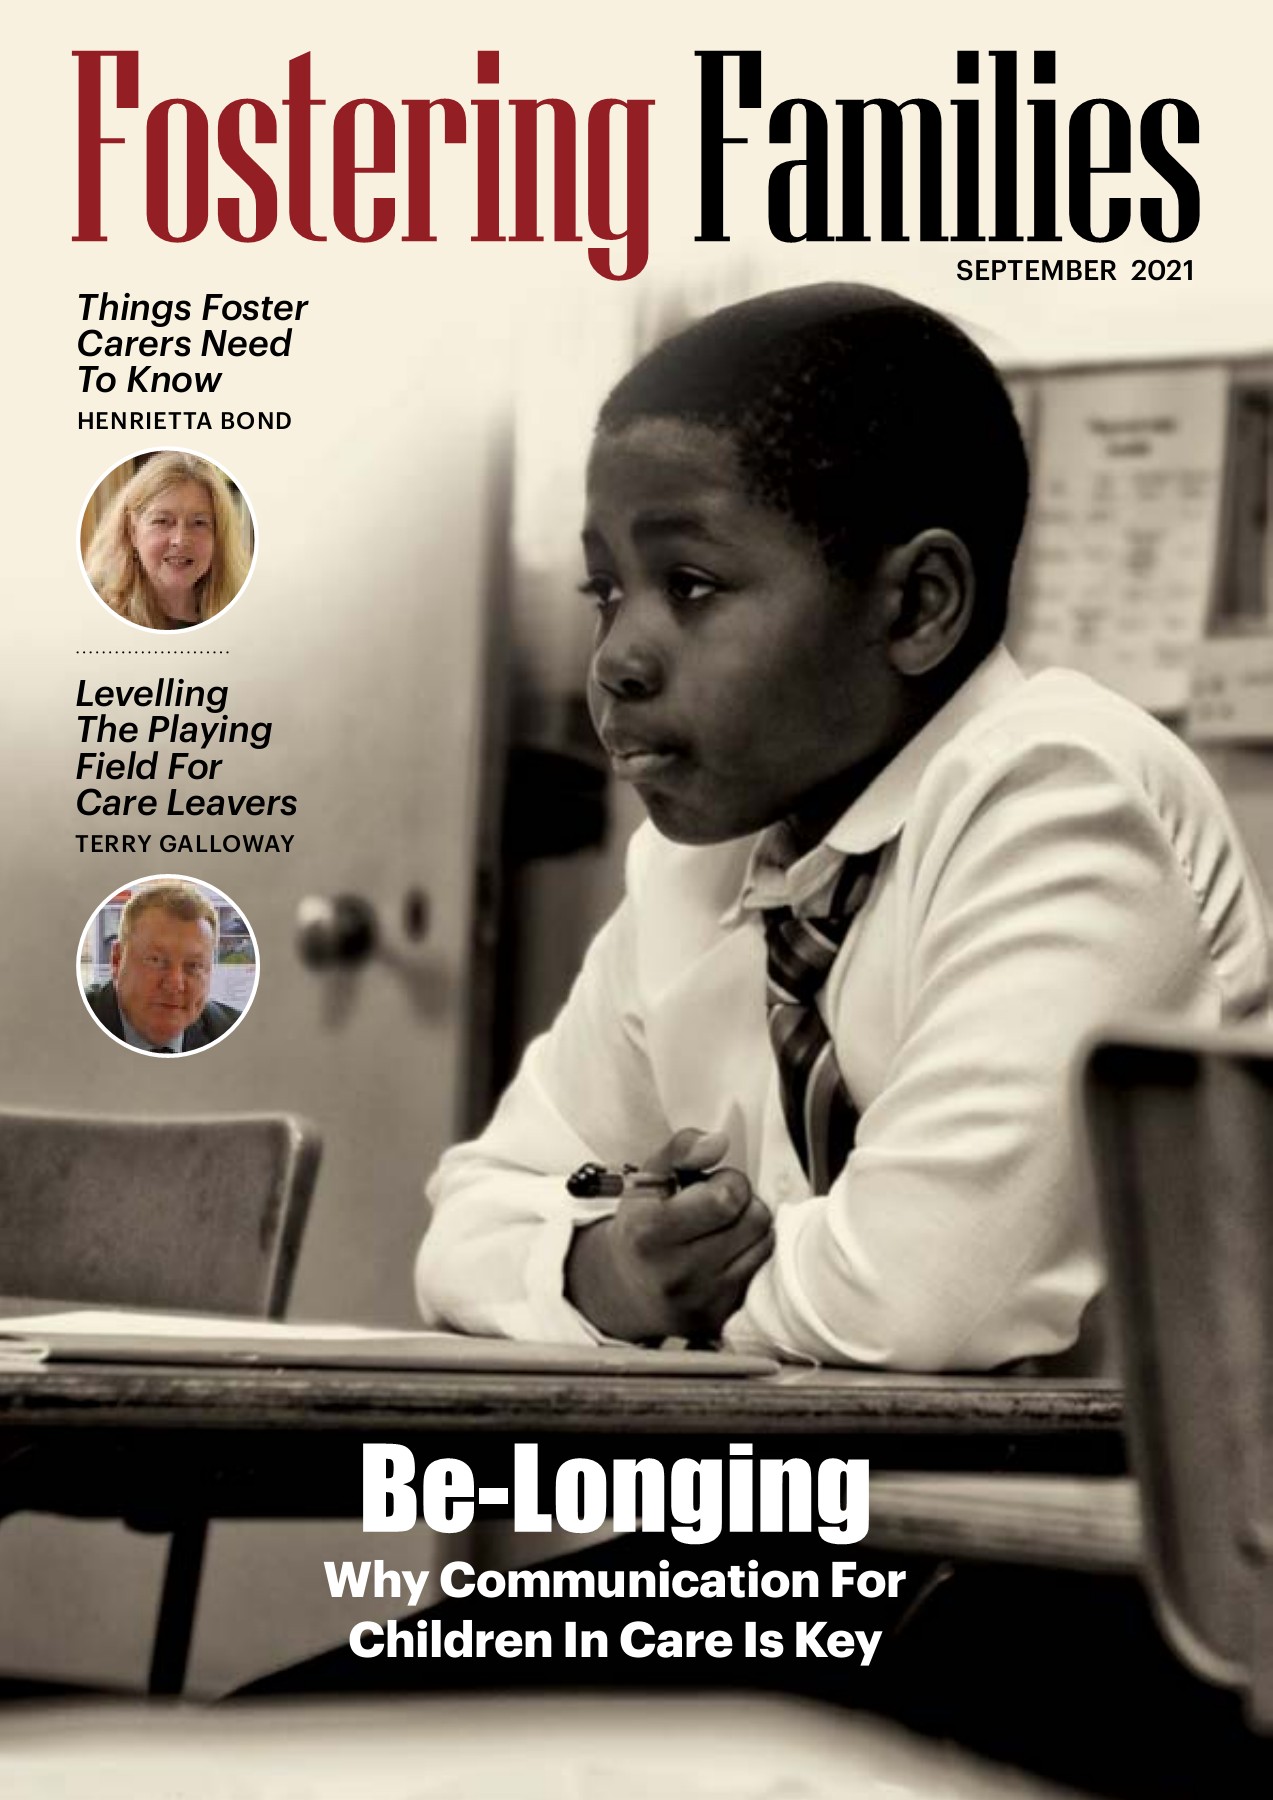 Fostering Families Magazine September 2021